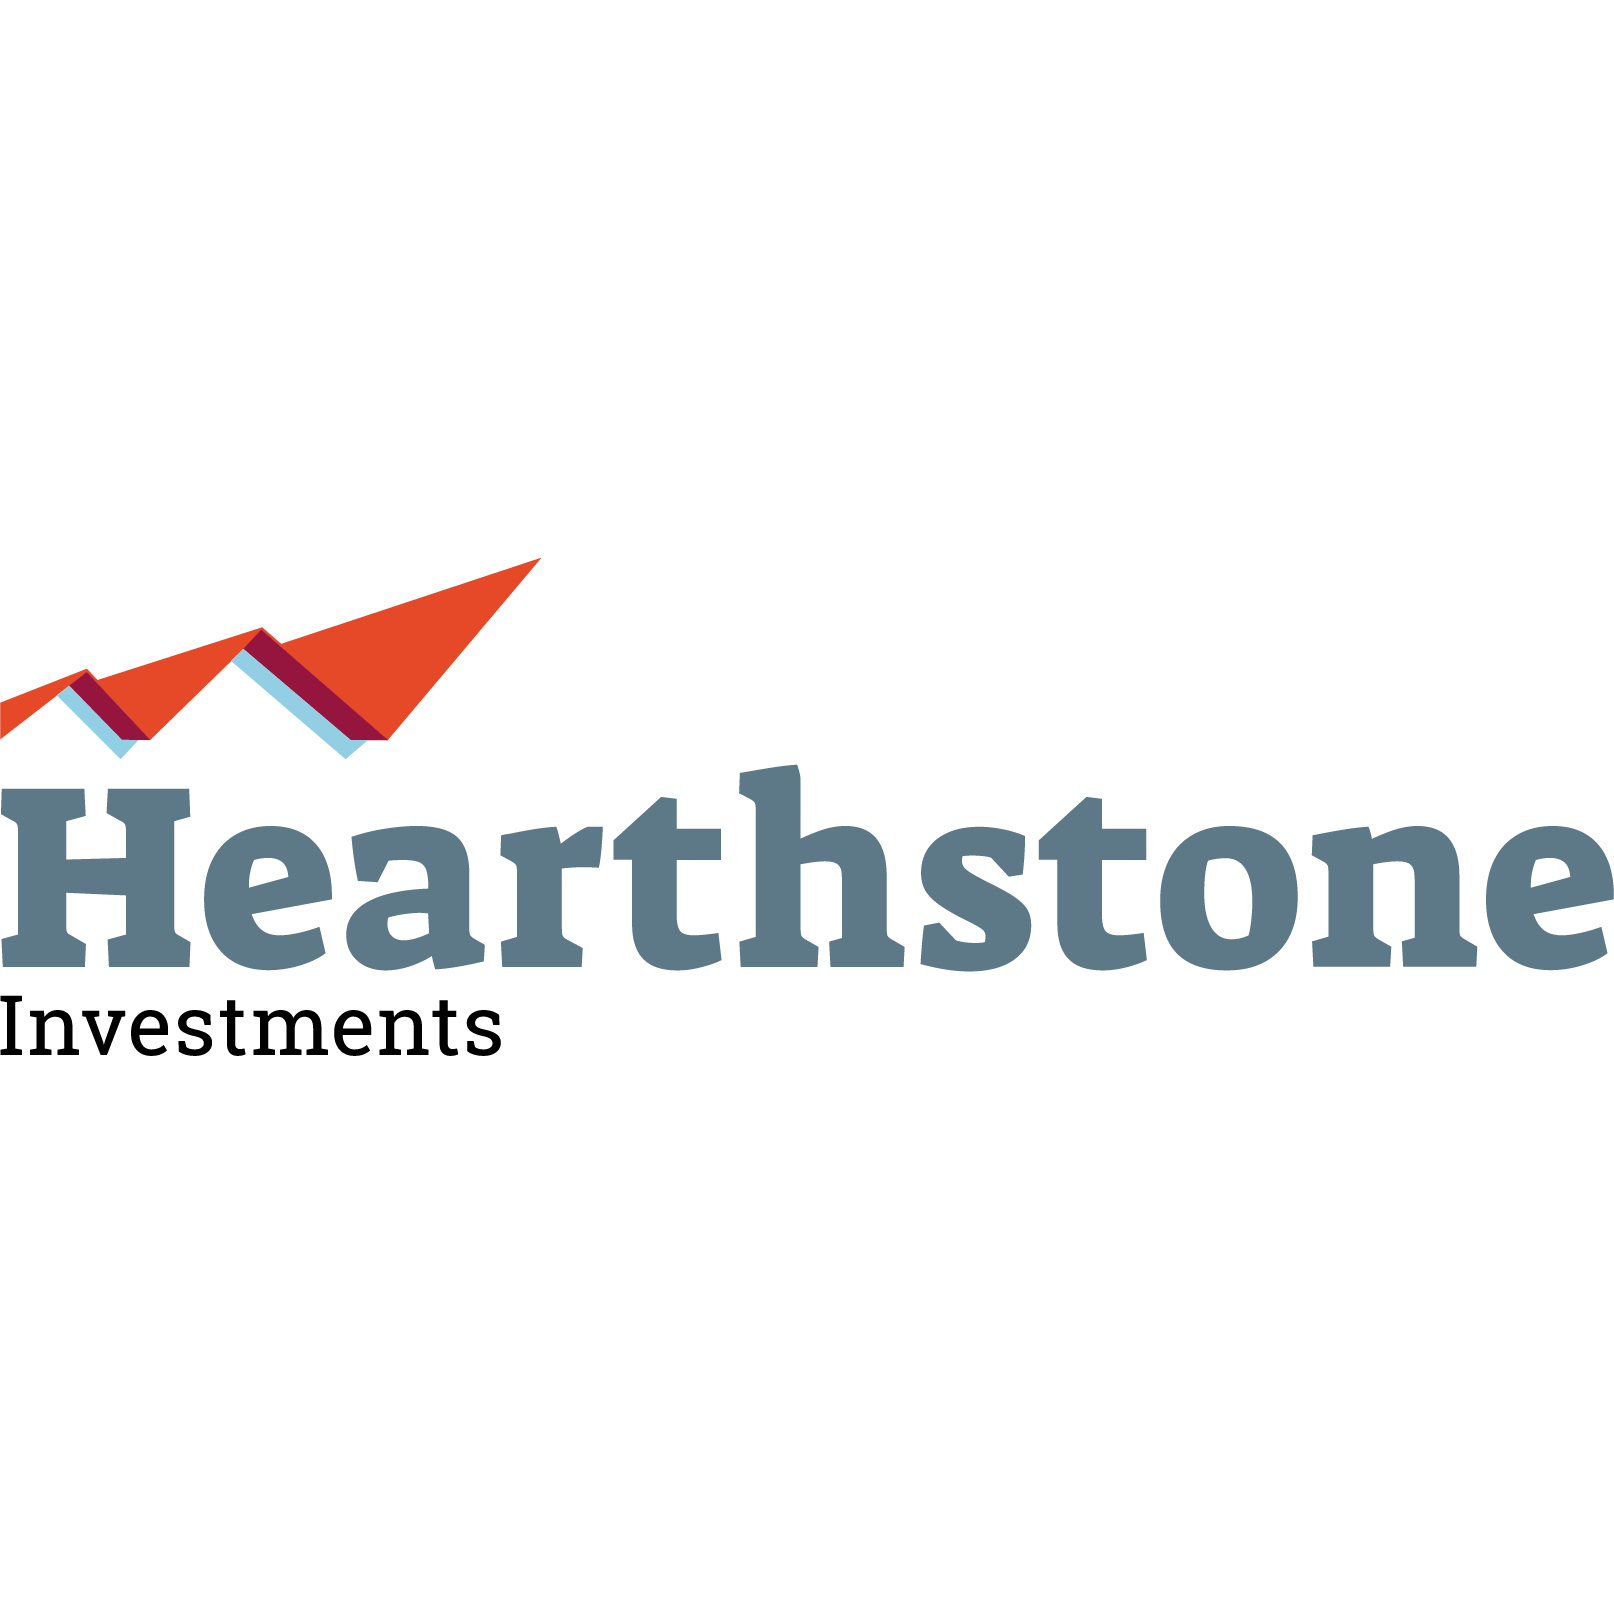 Hearthstone Investments joins Good Homes Alliance